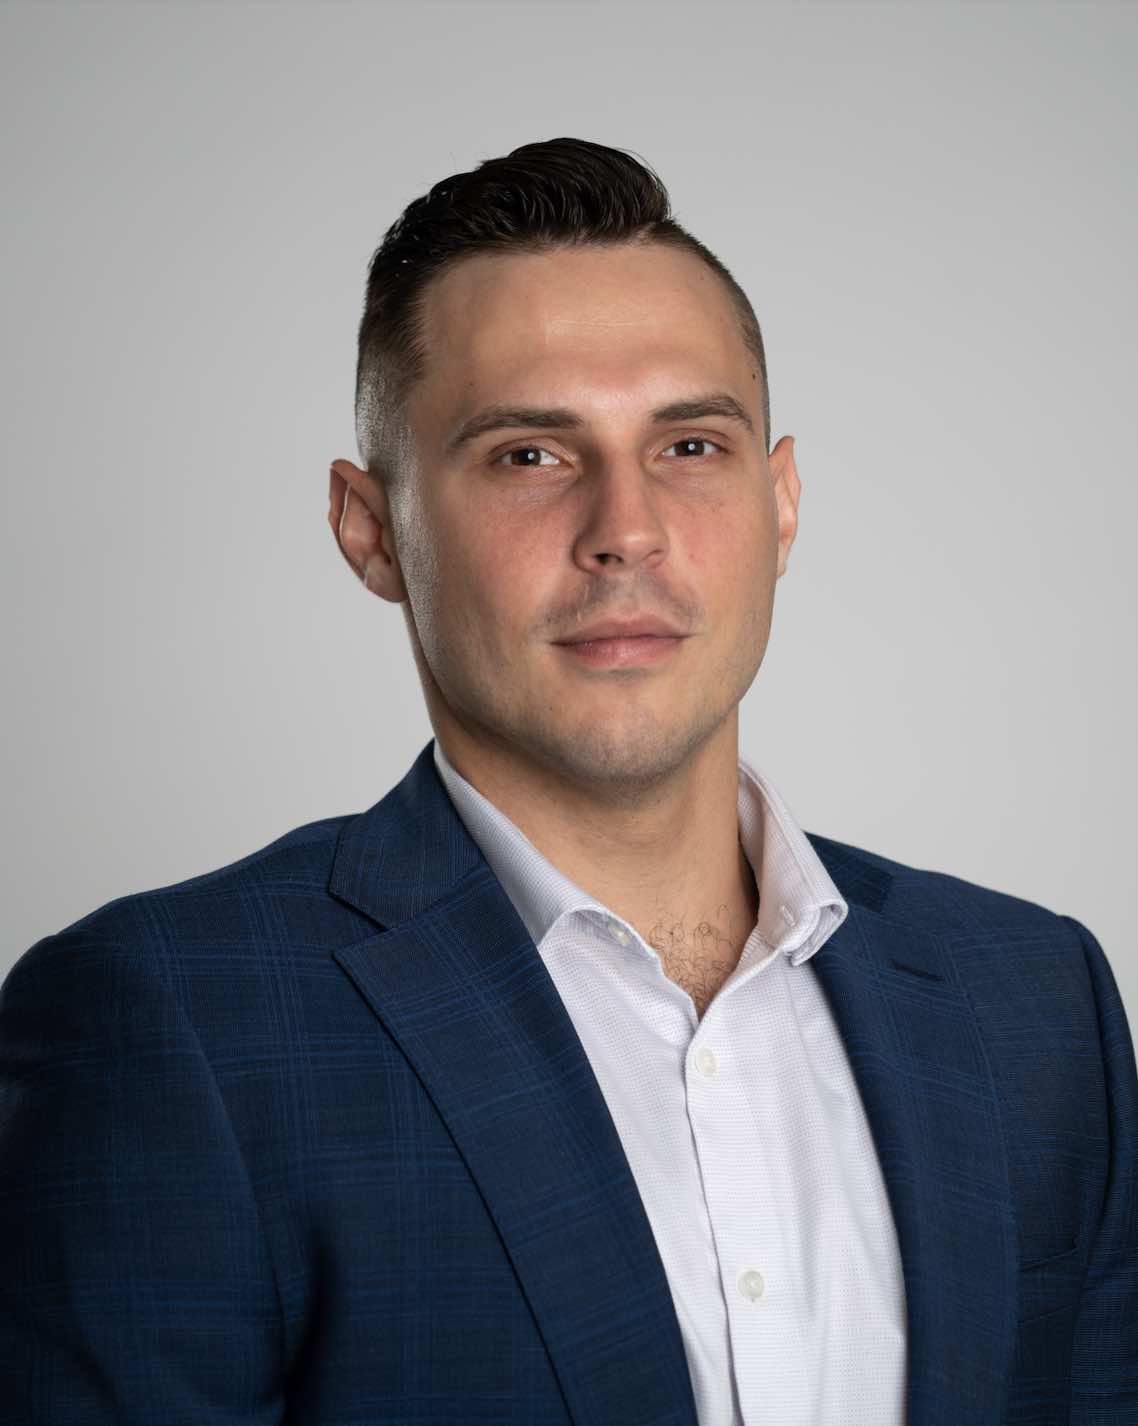 Meet Vlad Varizhuk and his Company, Enopoly, the Ecommerce Automation Leader